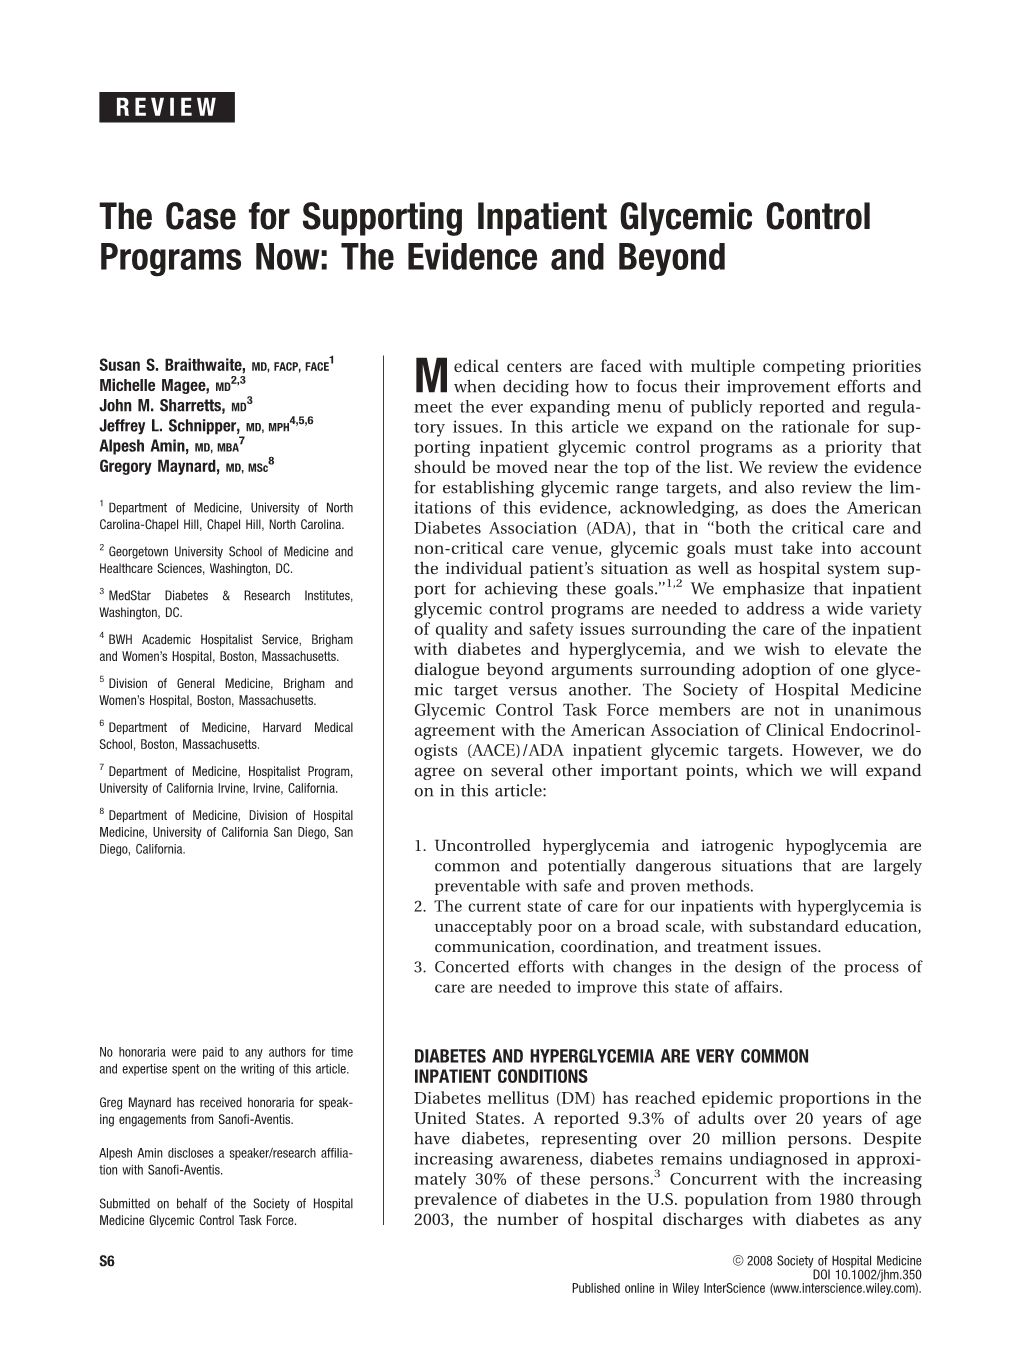 The Case for Supporting Inpatient Glycemic Control Programs Now: the Evidence and Beyond